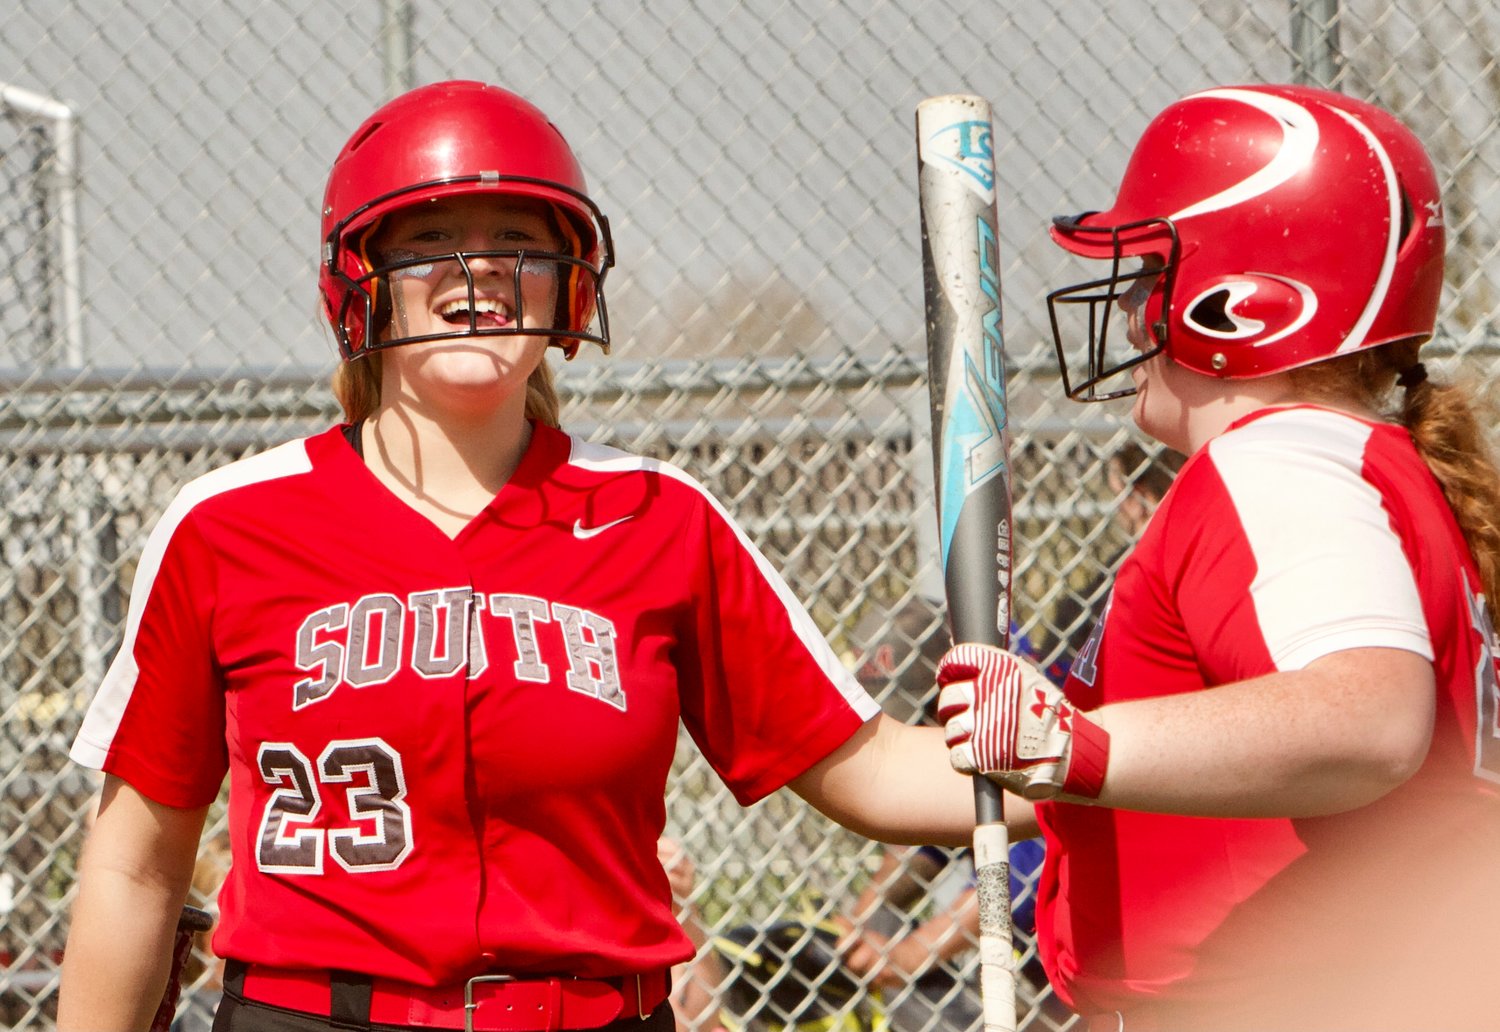 Southmont’s Macie Shirk has done it all for the Mounties this season. Her 11 home runs have tied the single season school record as she looks to help deliver another sectional title for Southmont.